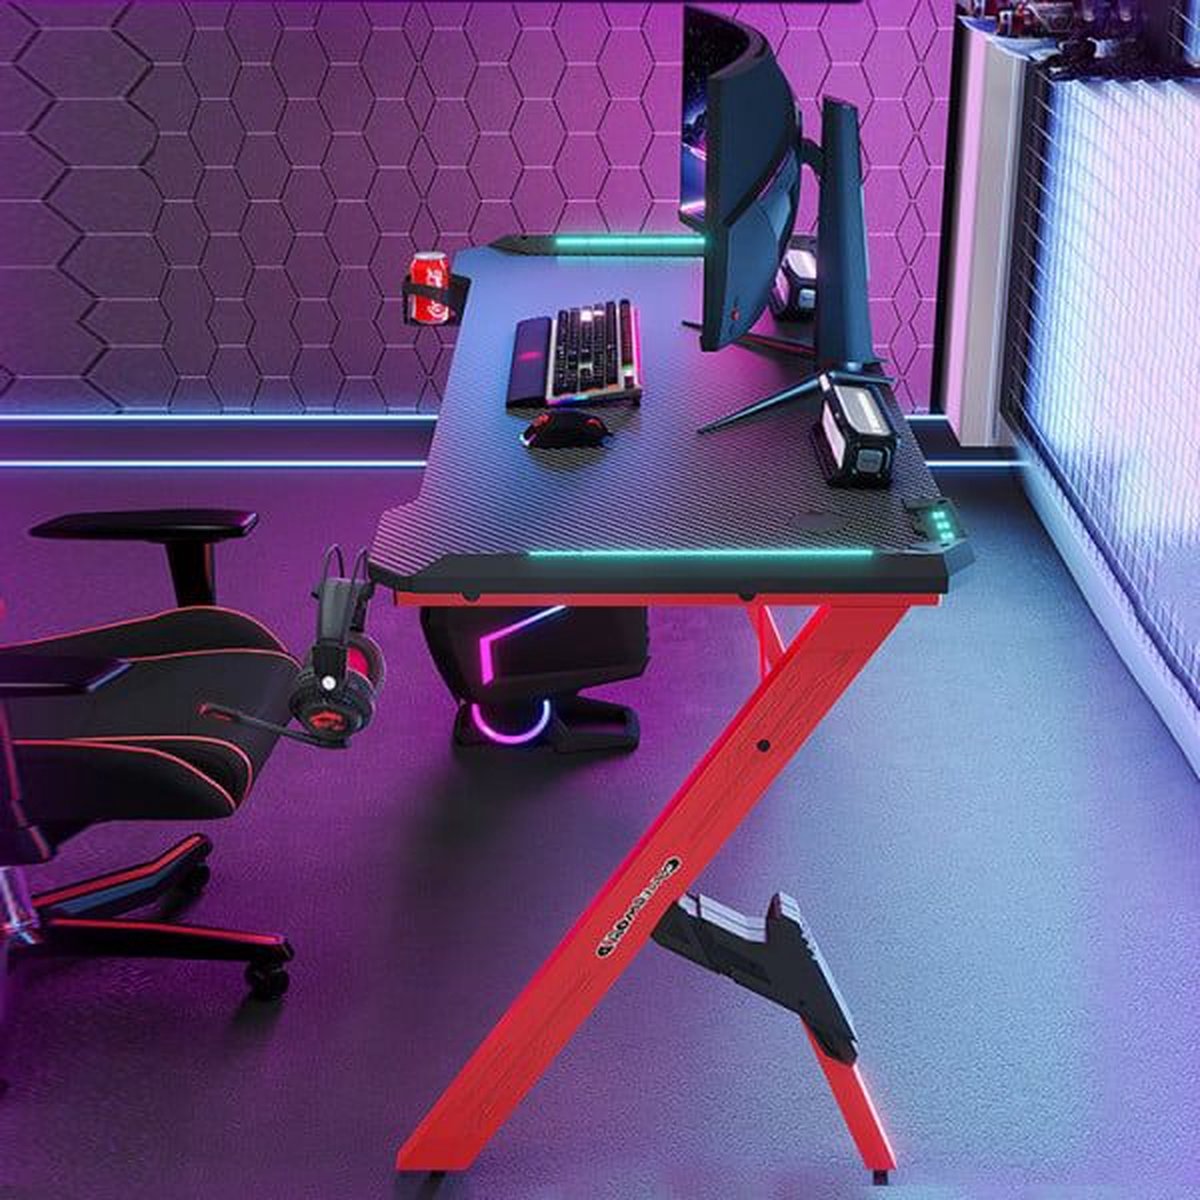 For The Win Game Bureau - 140x60x73 cm - Gaming Desk met LED Verlichting -  Incl RGB